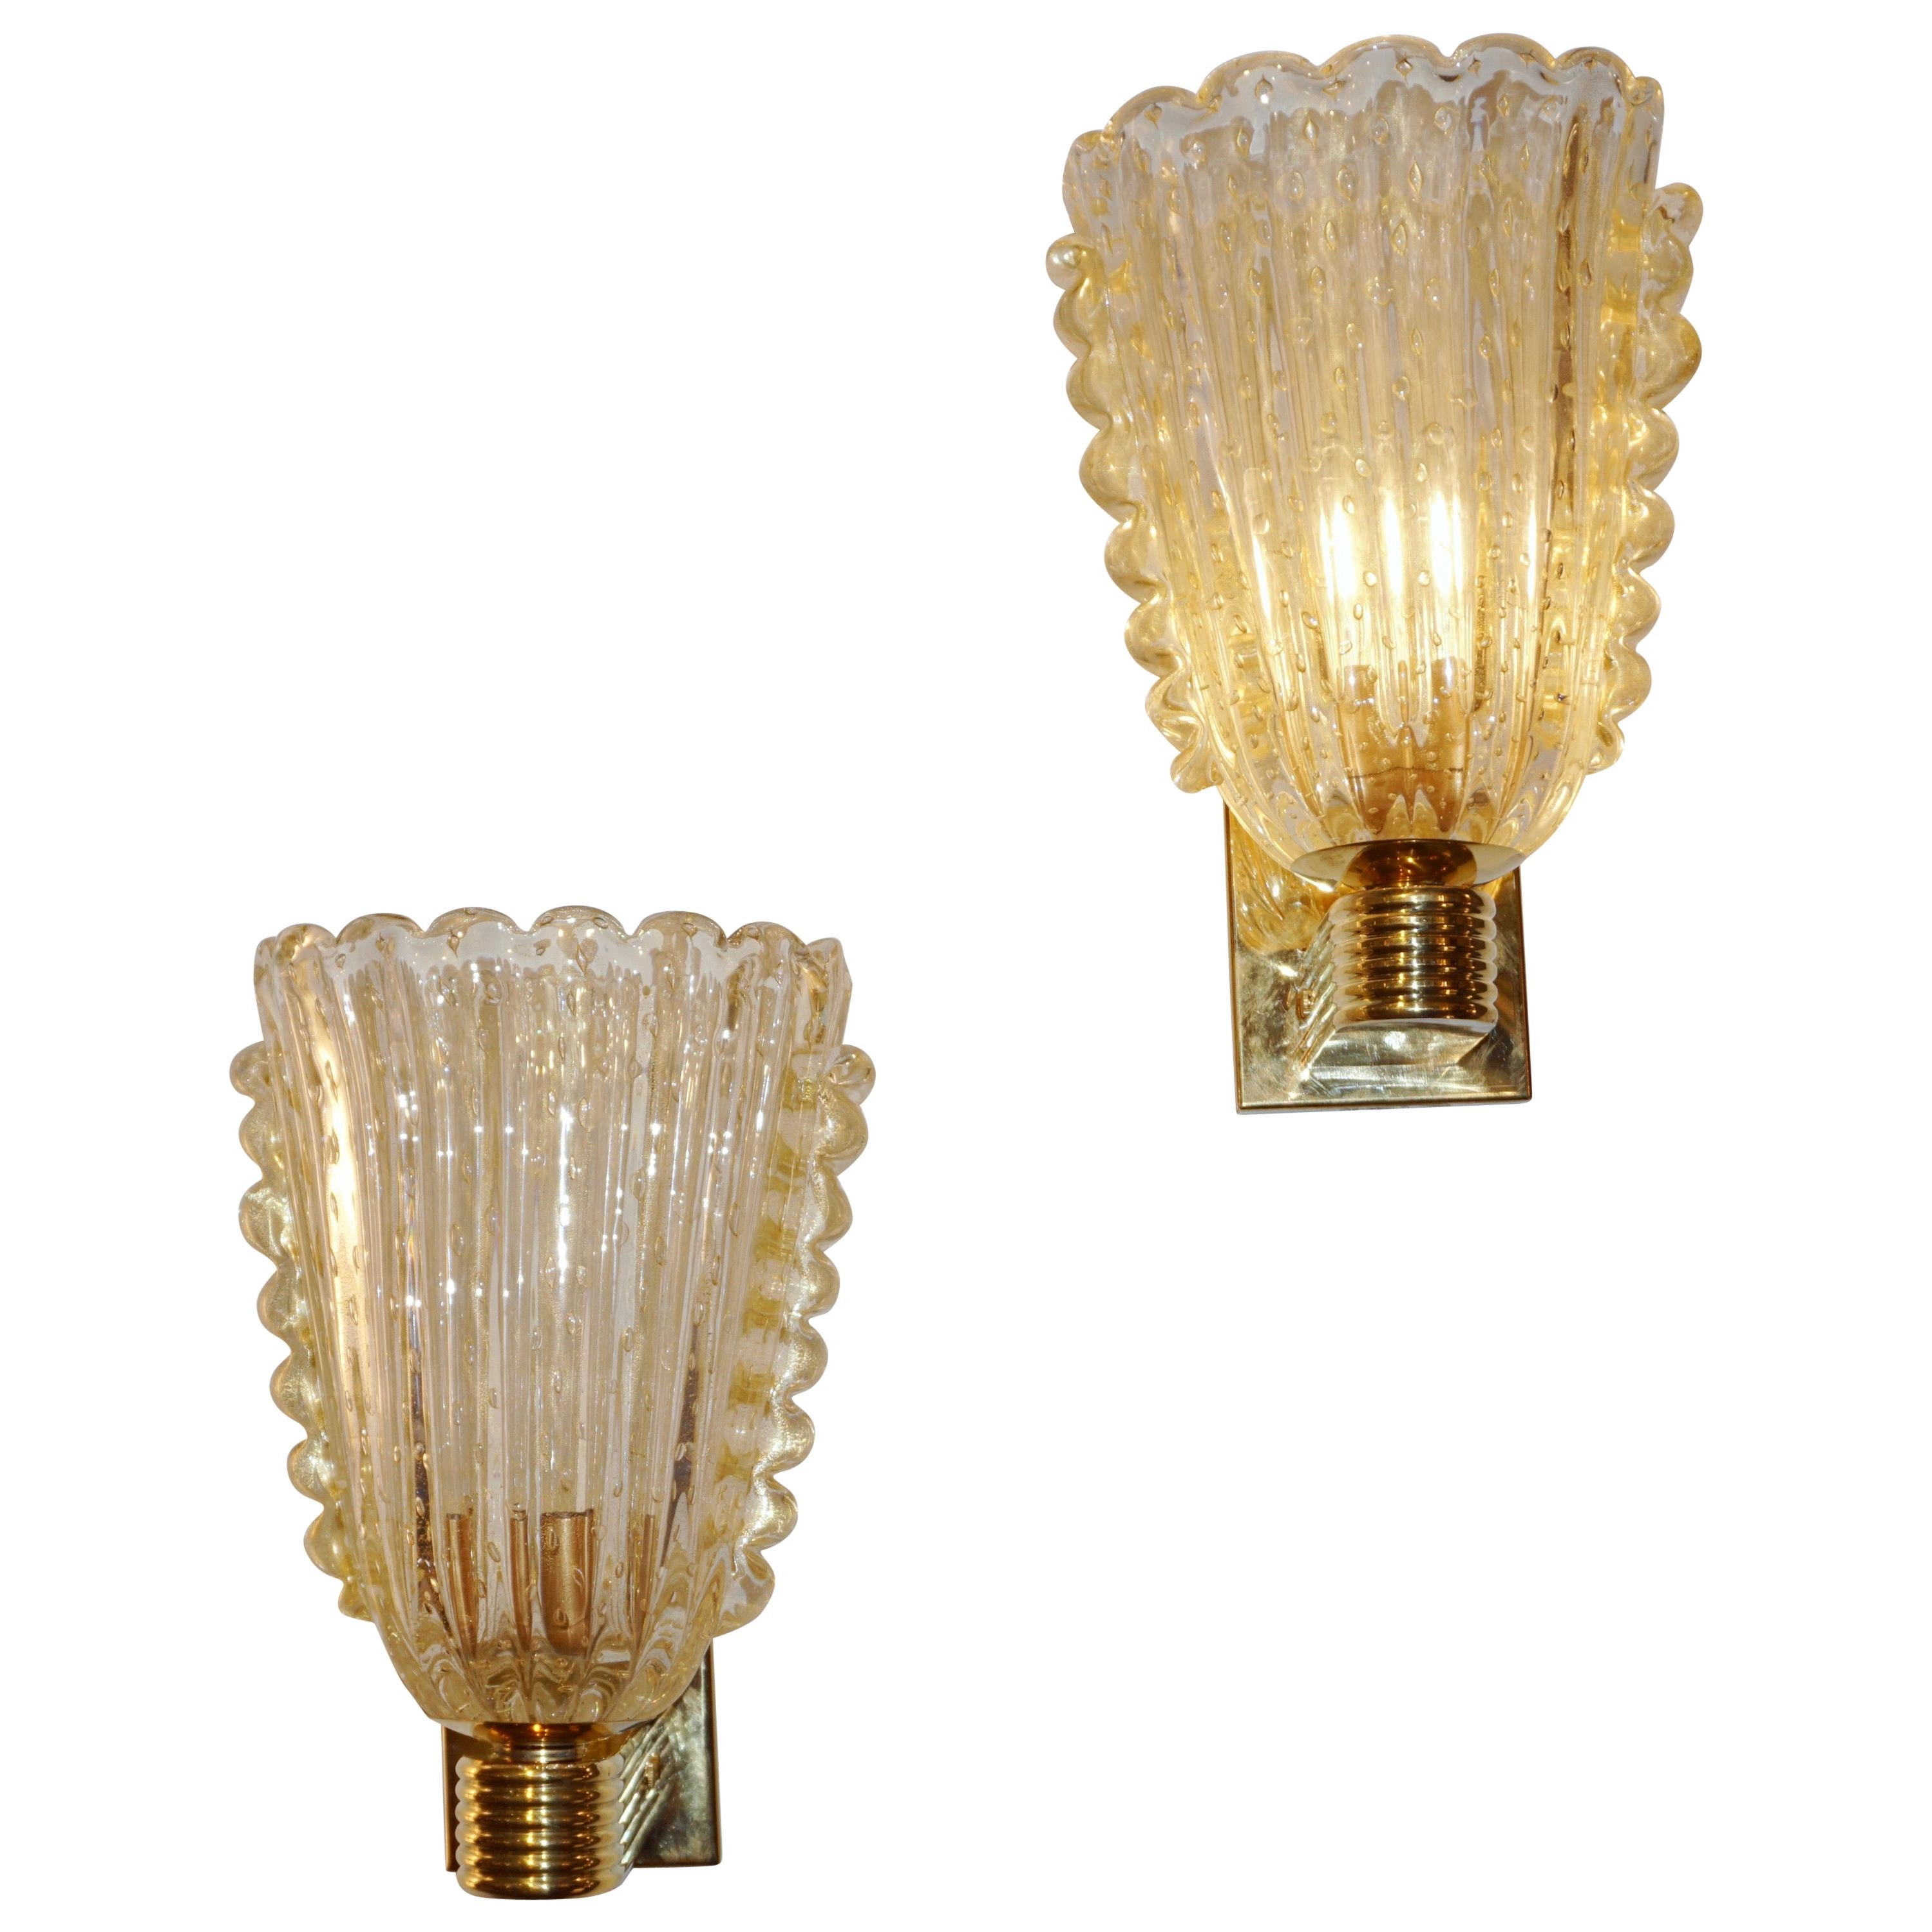 1990s Venetian wall lights of modern organic design, creation by Barovier in Art Deco style, entirely handcrafted, the scalloped edge bowls in high-quality crystal blown Murano glass decorated with the pulegoso technique: big bubbles in the glass,